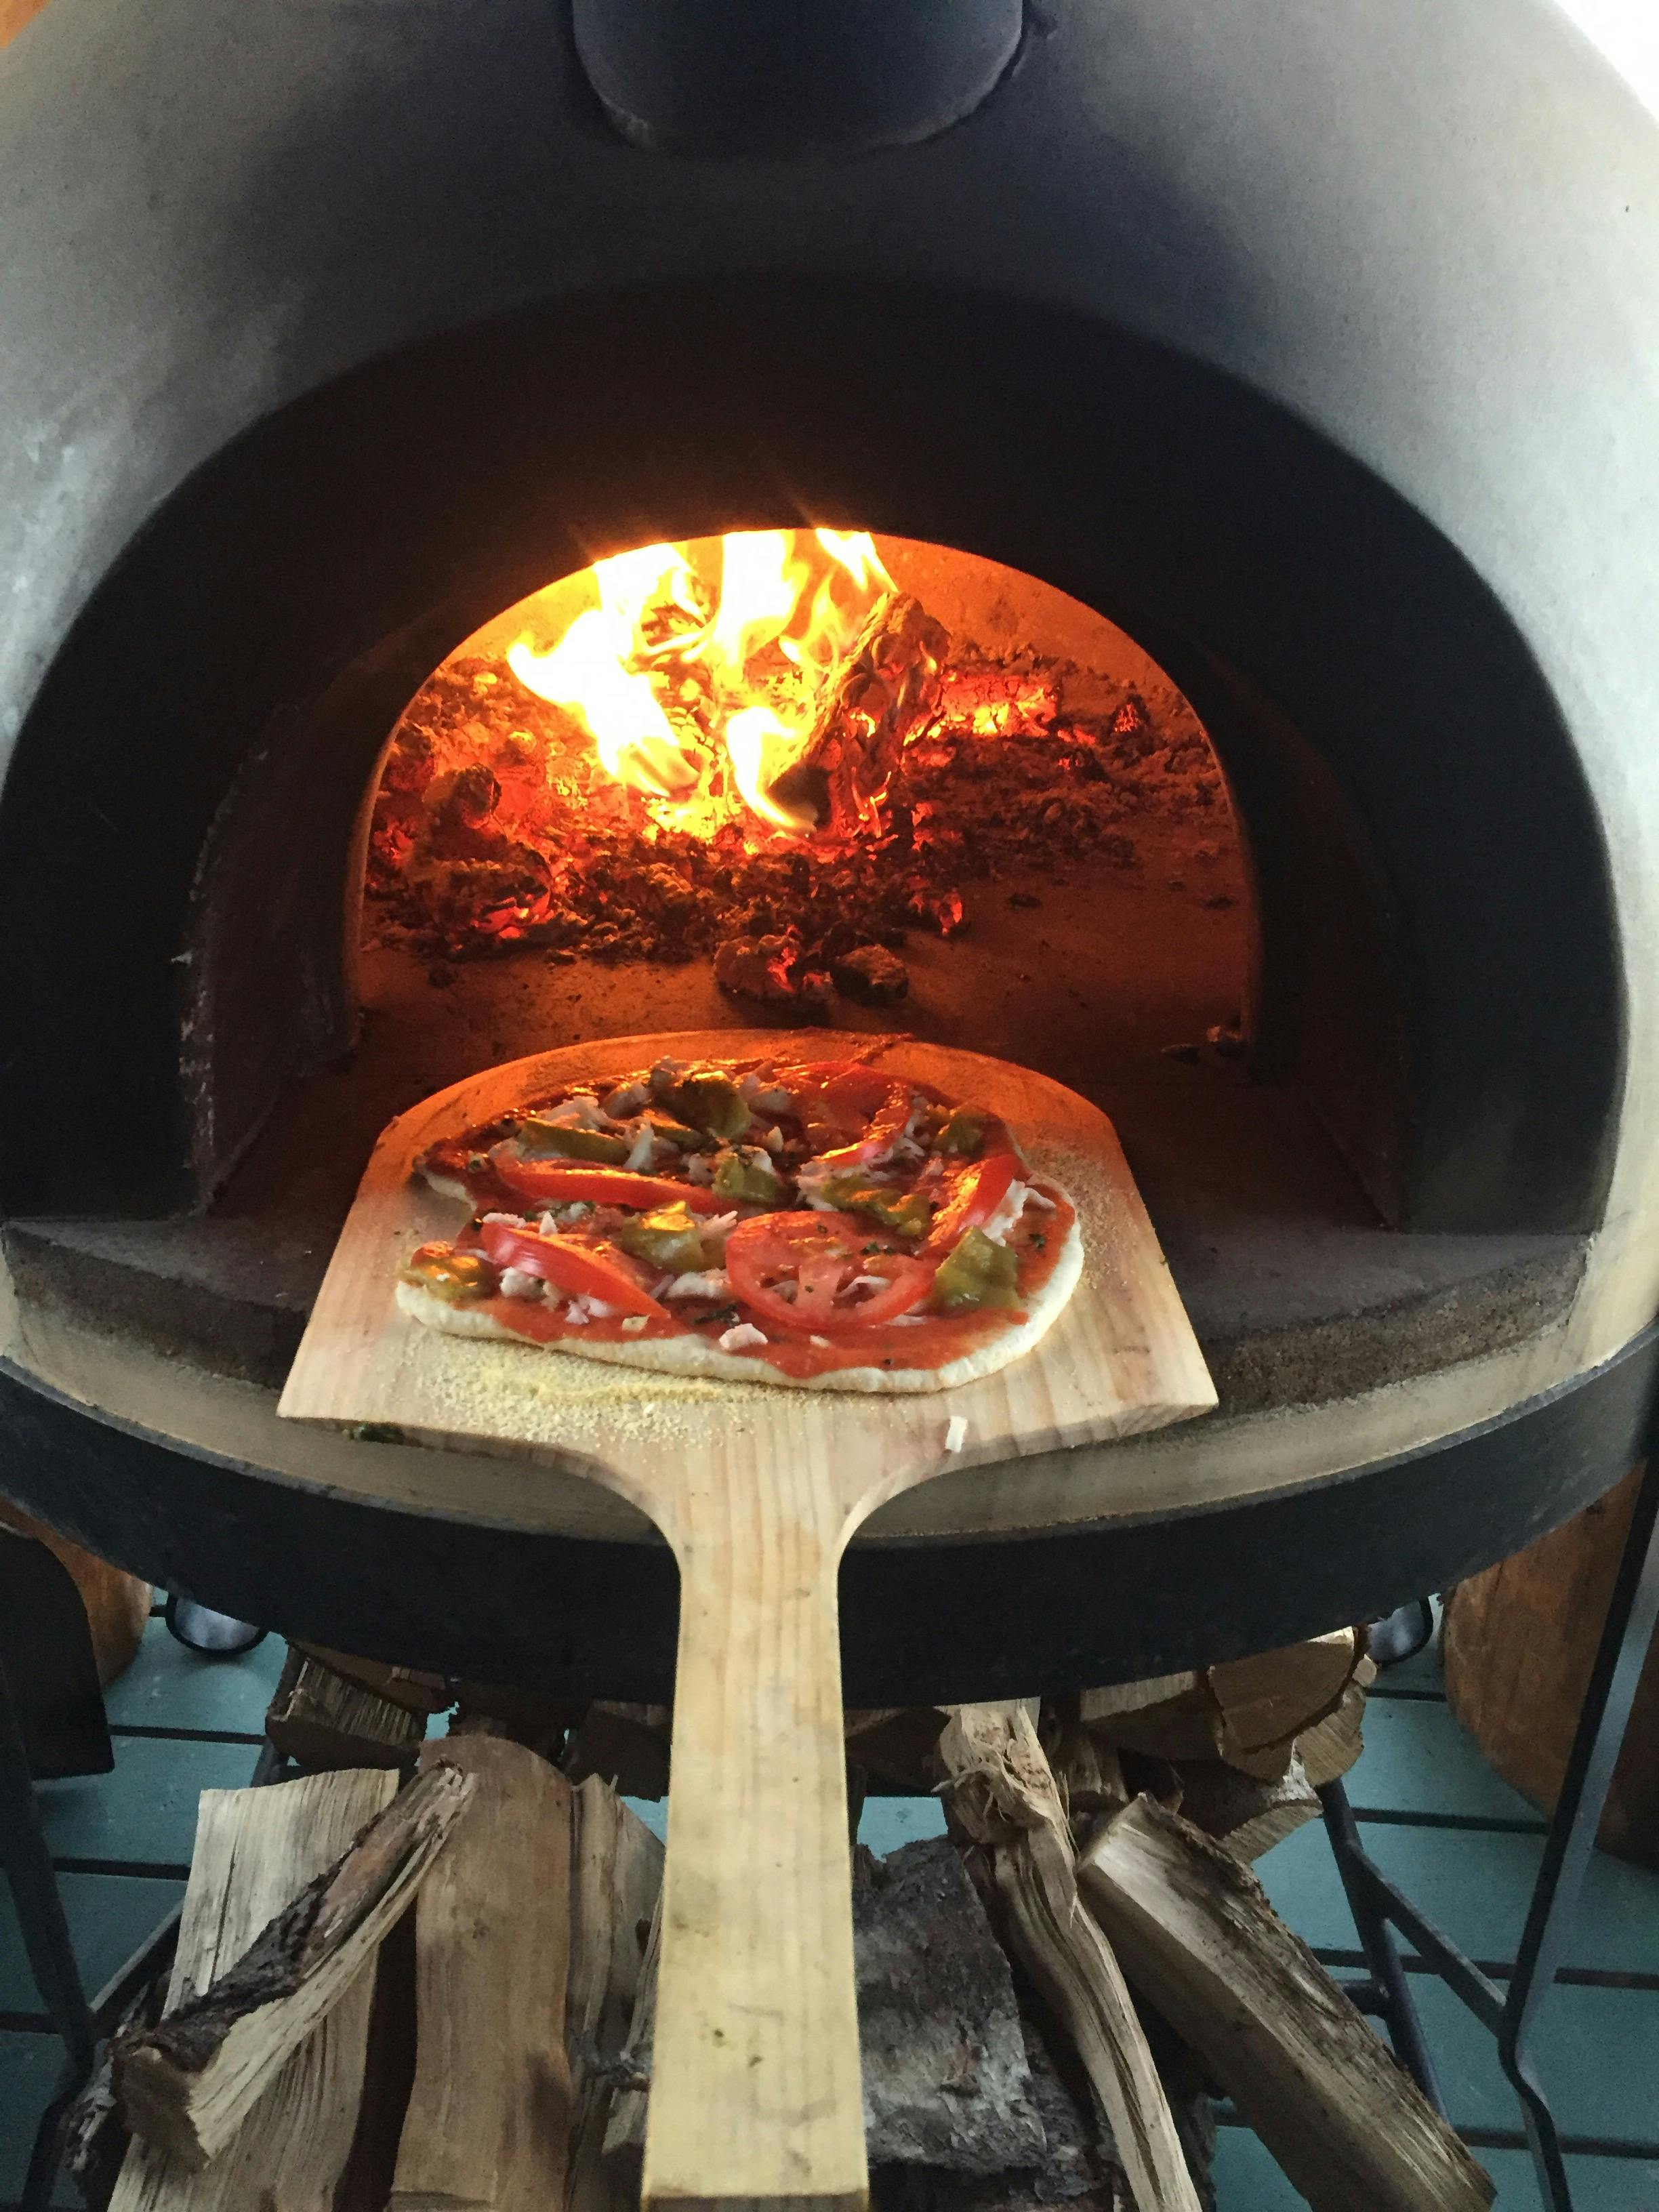 A house-made pizza on a wooden paddle ready to go in to the pizza oven at Alaska's Deep Creek Fishing Club.